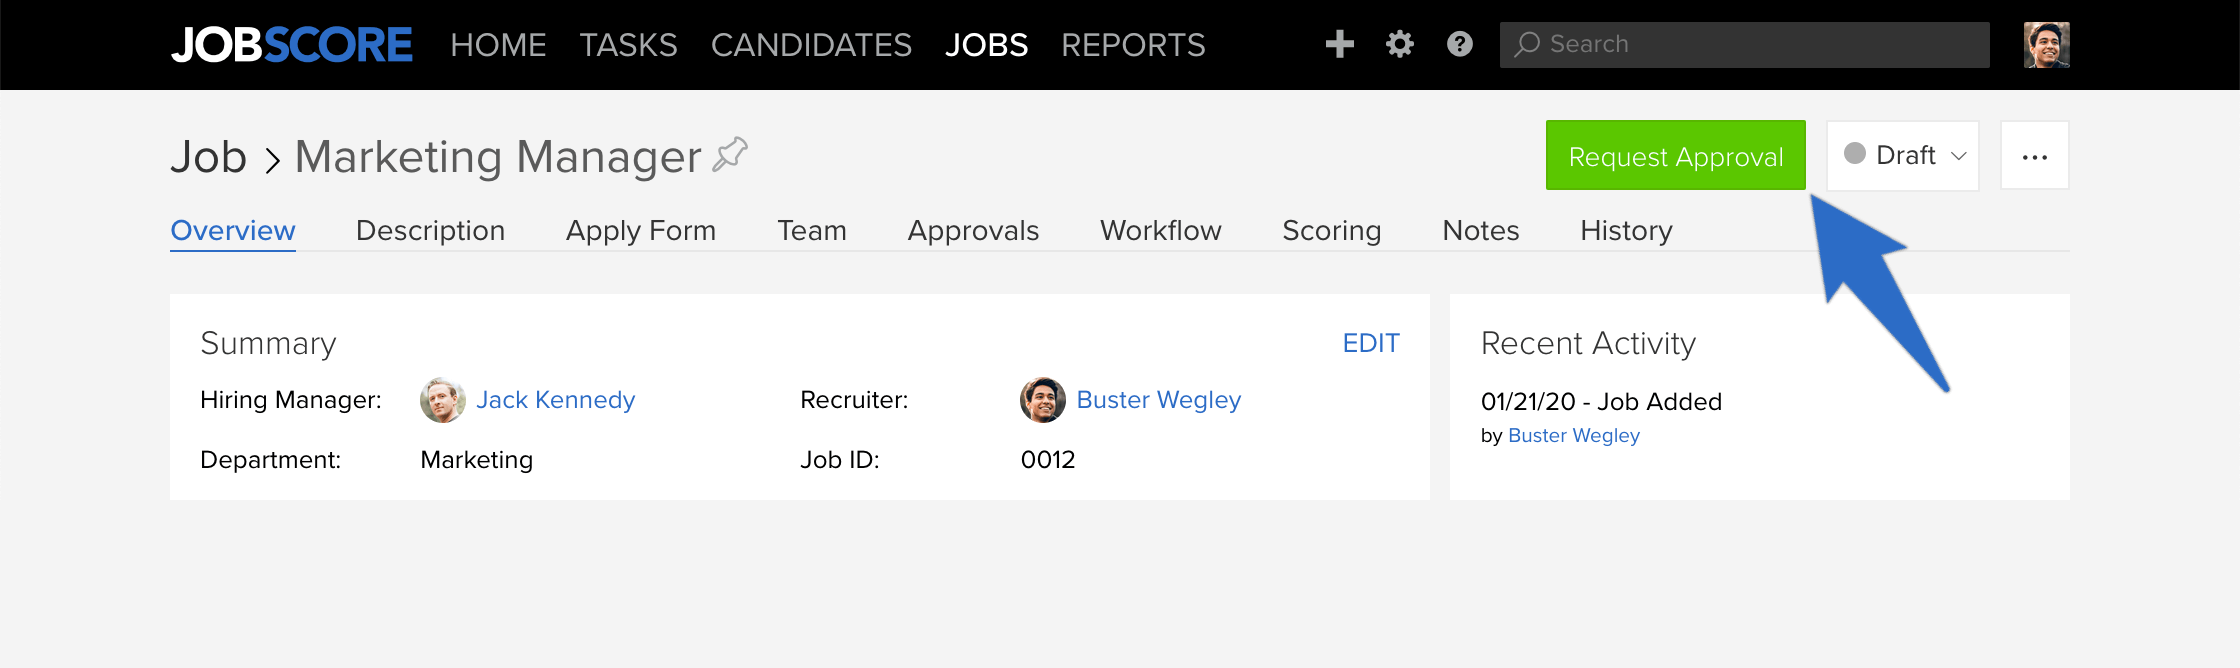 Job Request Approval